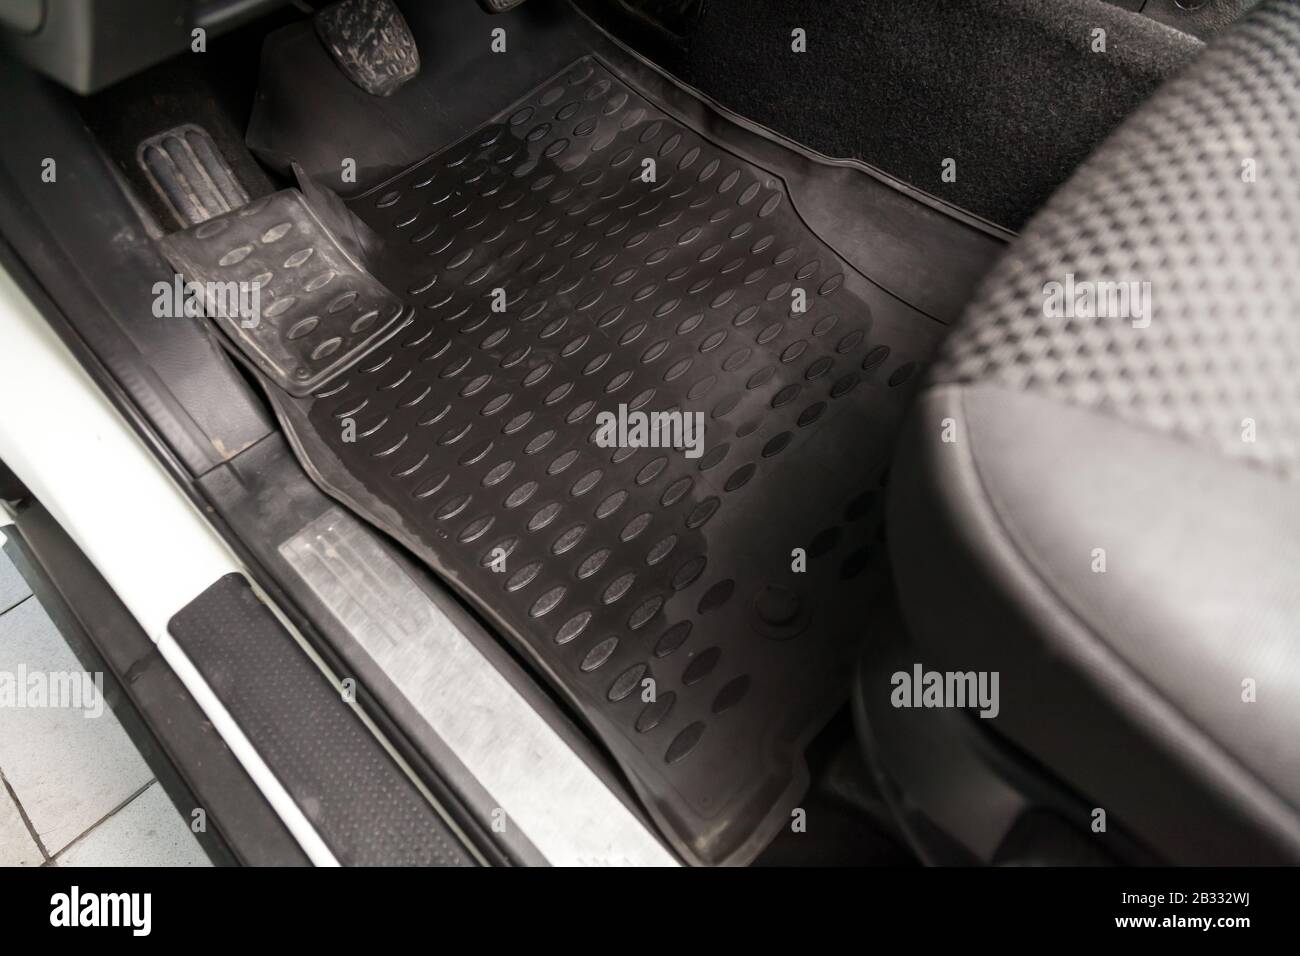 Sar Floor Mats Of Black Rubber With Gas Pedals And Brakes In The